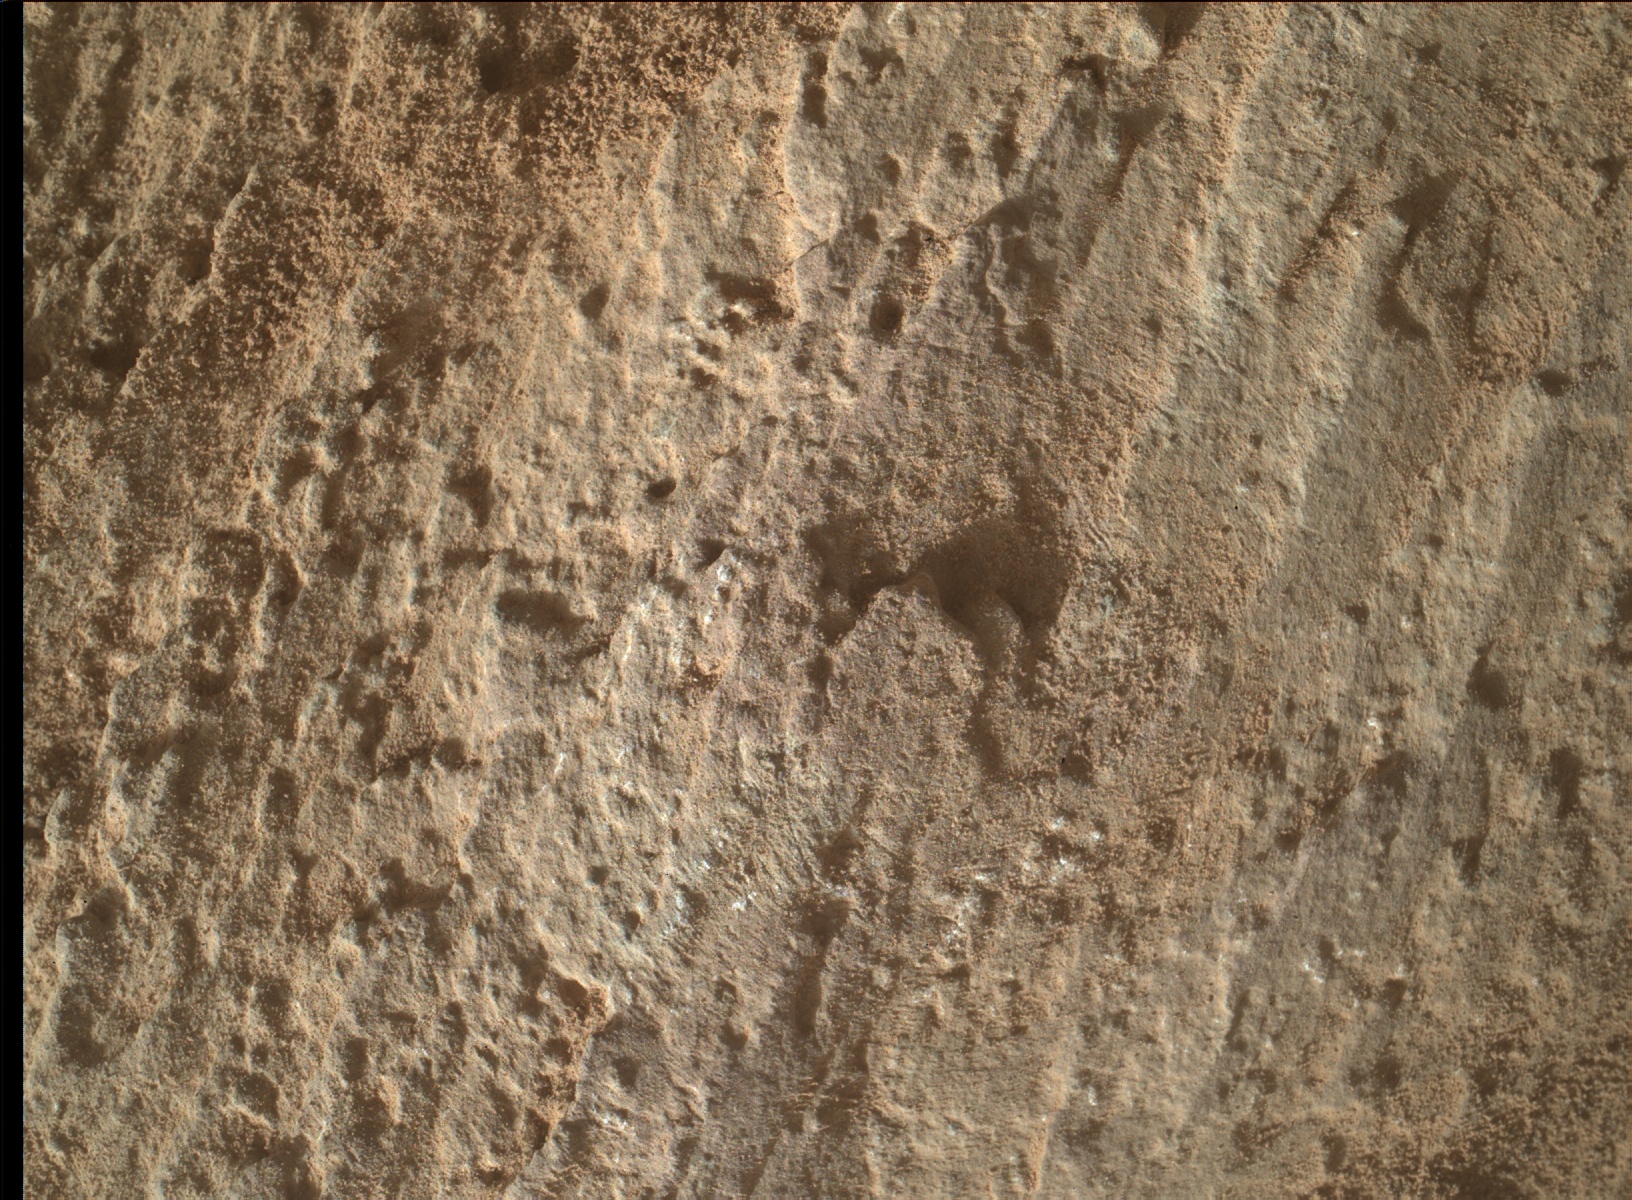 Nasa's Mars rover Curiosity acquired this image using its Mars Hand Lens Imager (MAHLI) on Sol 2581